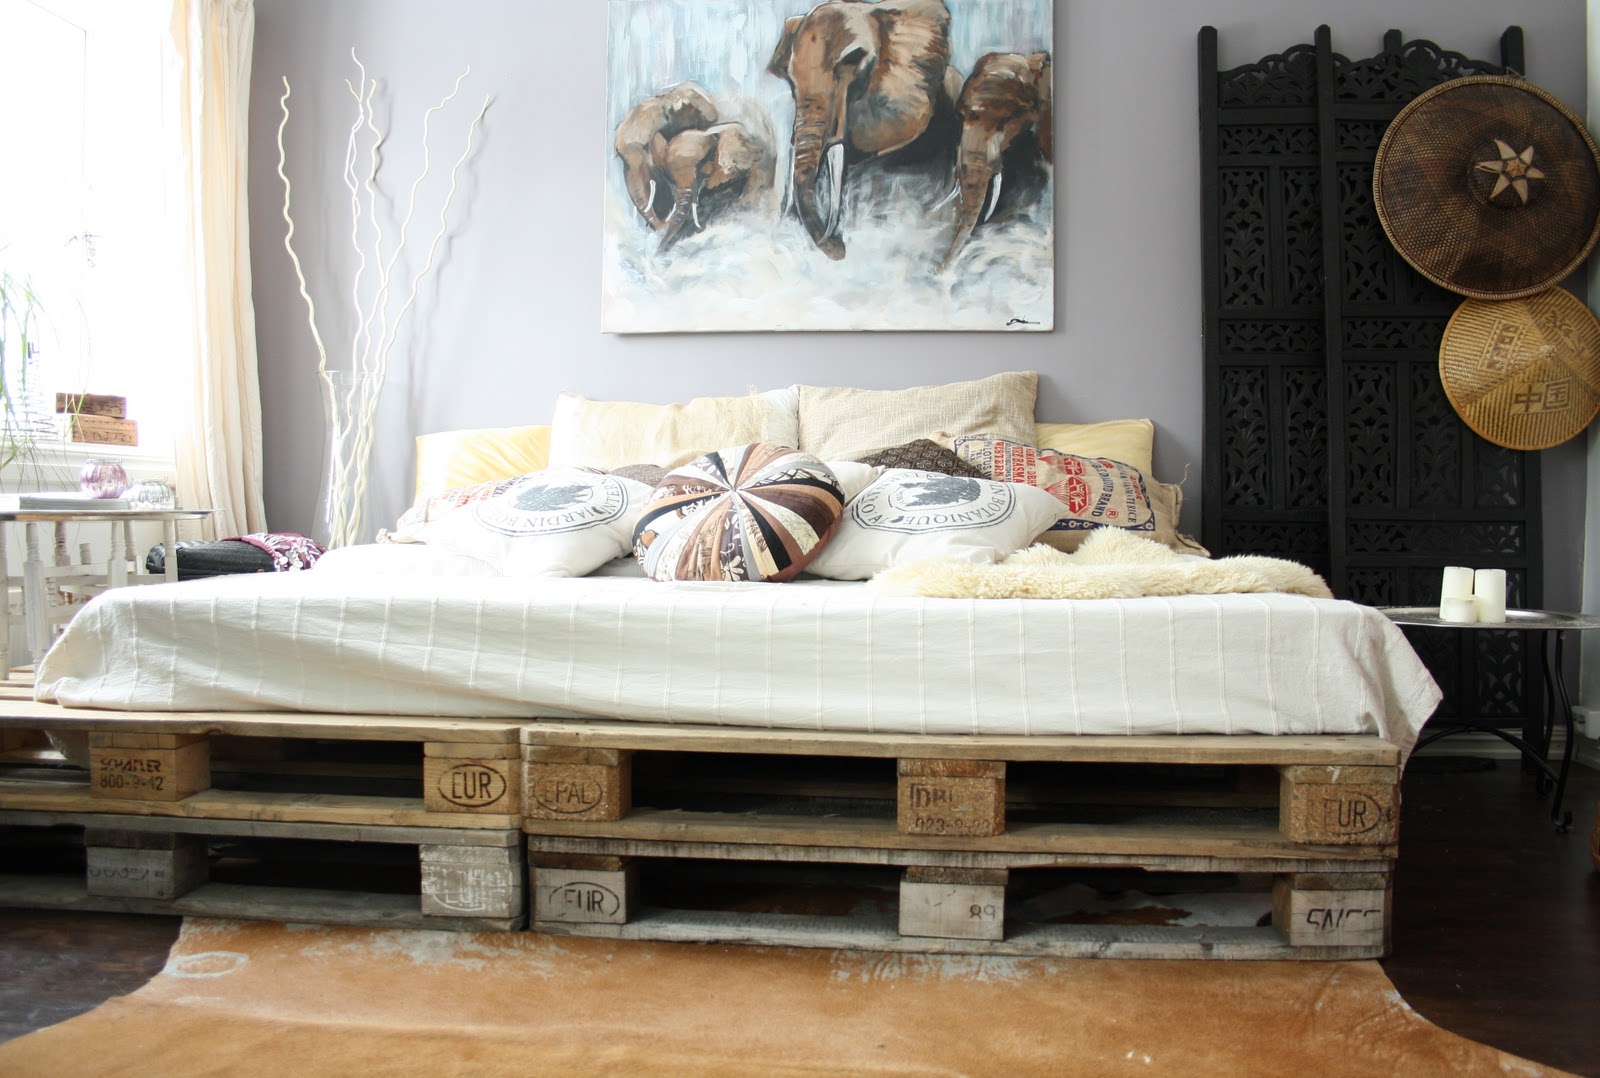 Cheap bed frame furniture from pallet diy decoration painting elephants shabby